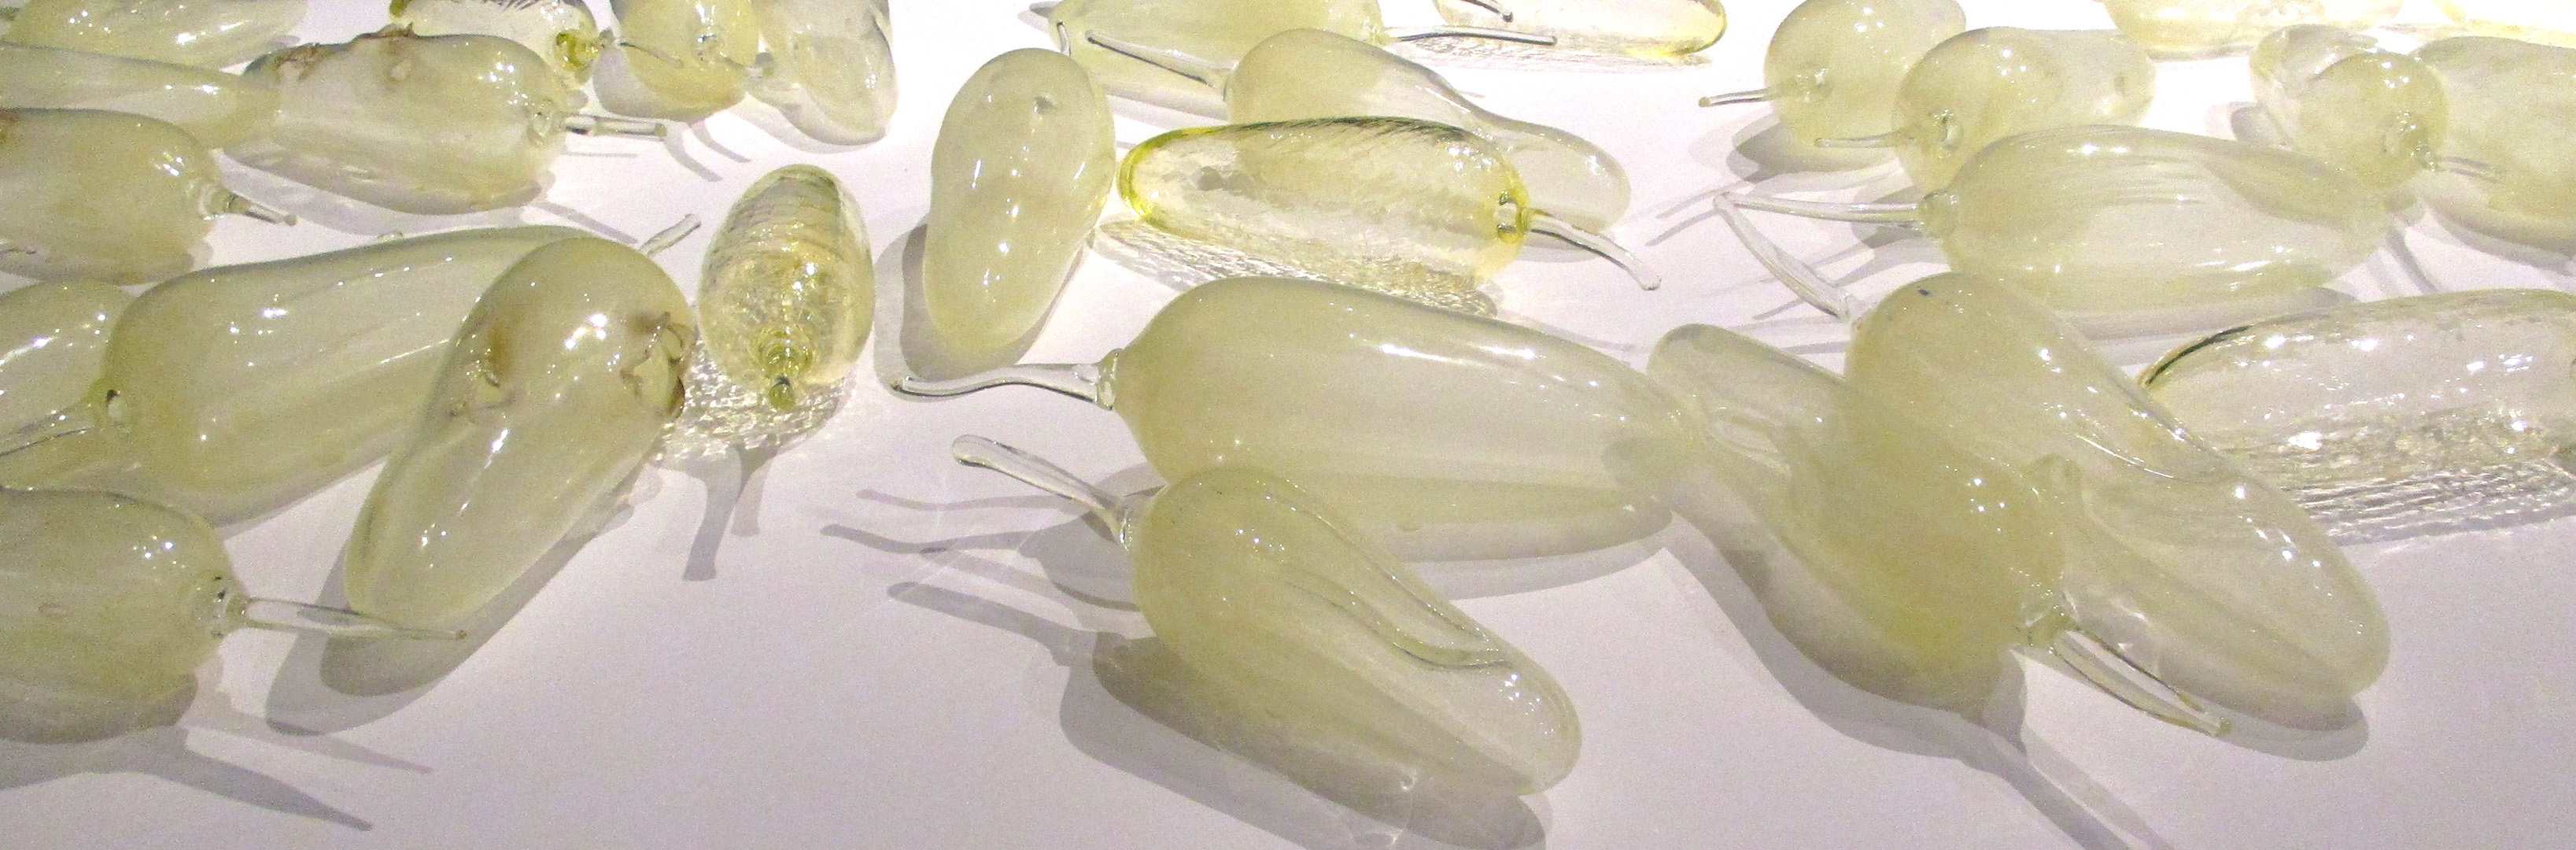 closely cropped photo of many translucent yellow glass bulbs on a white surface